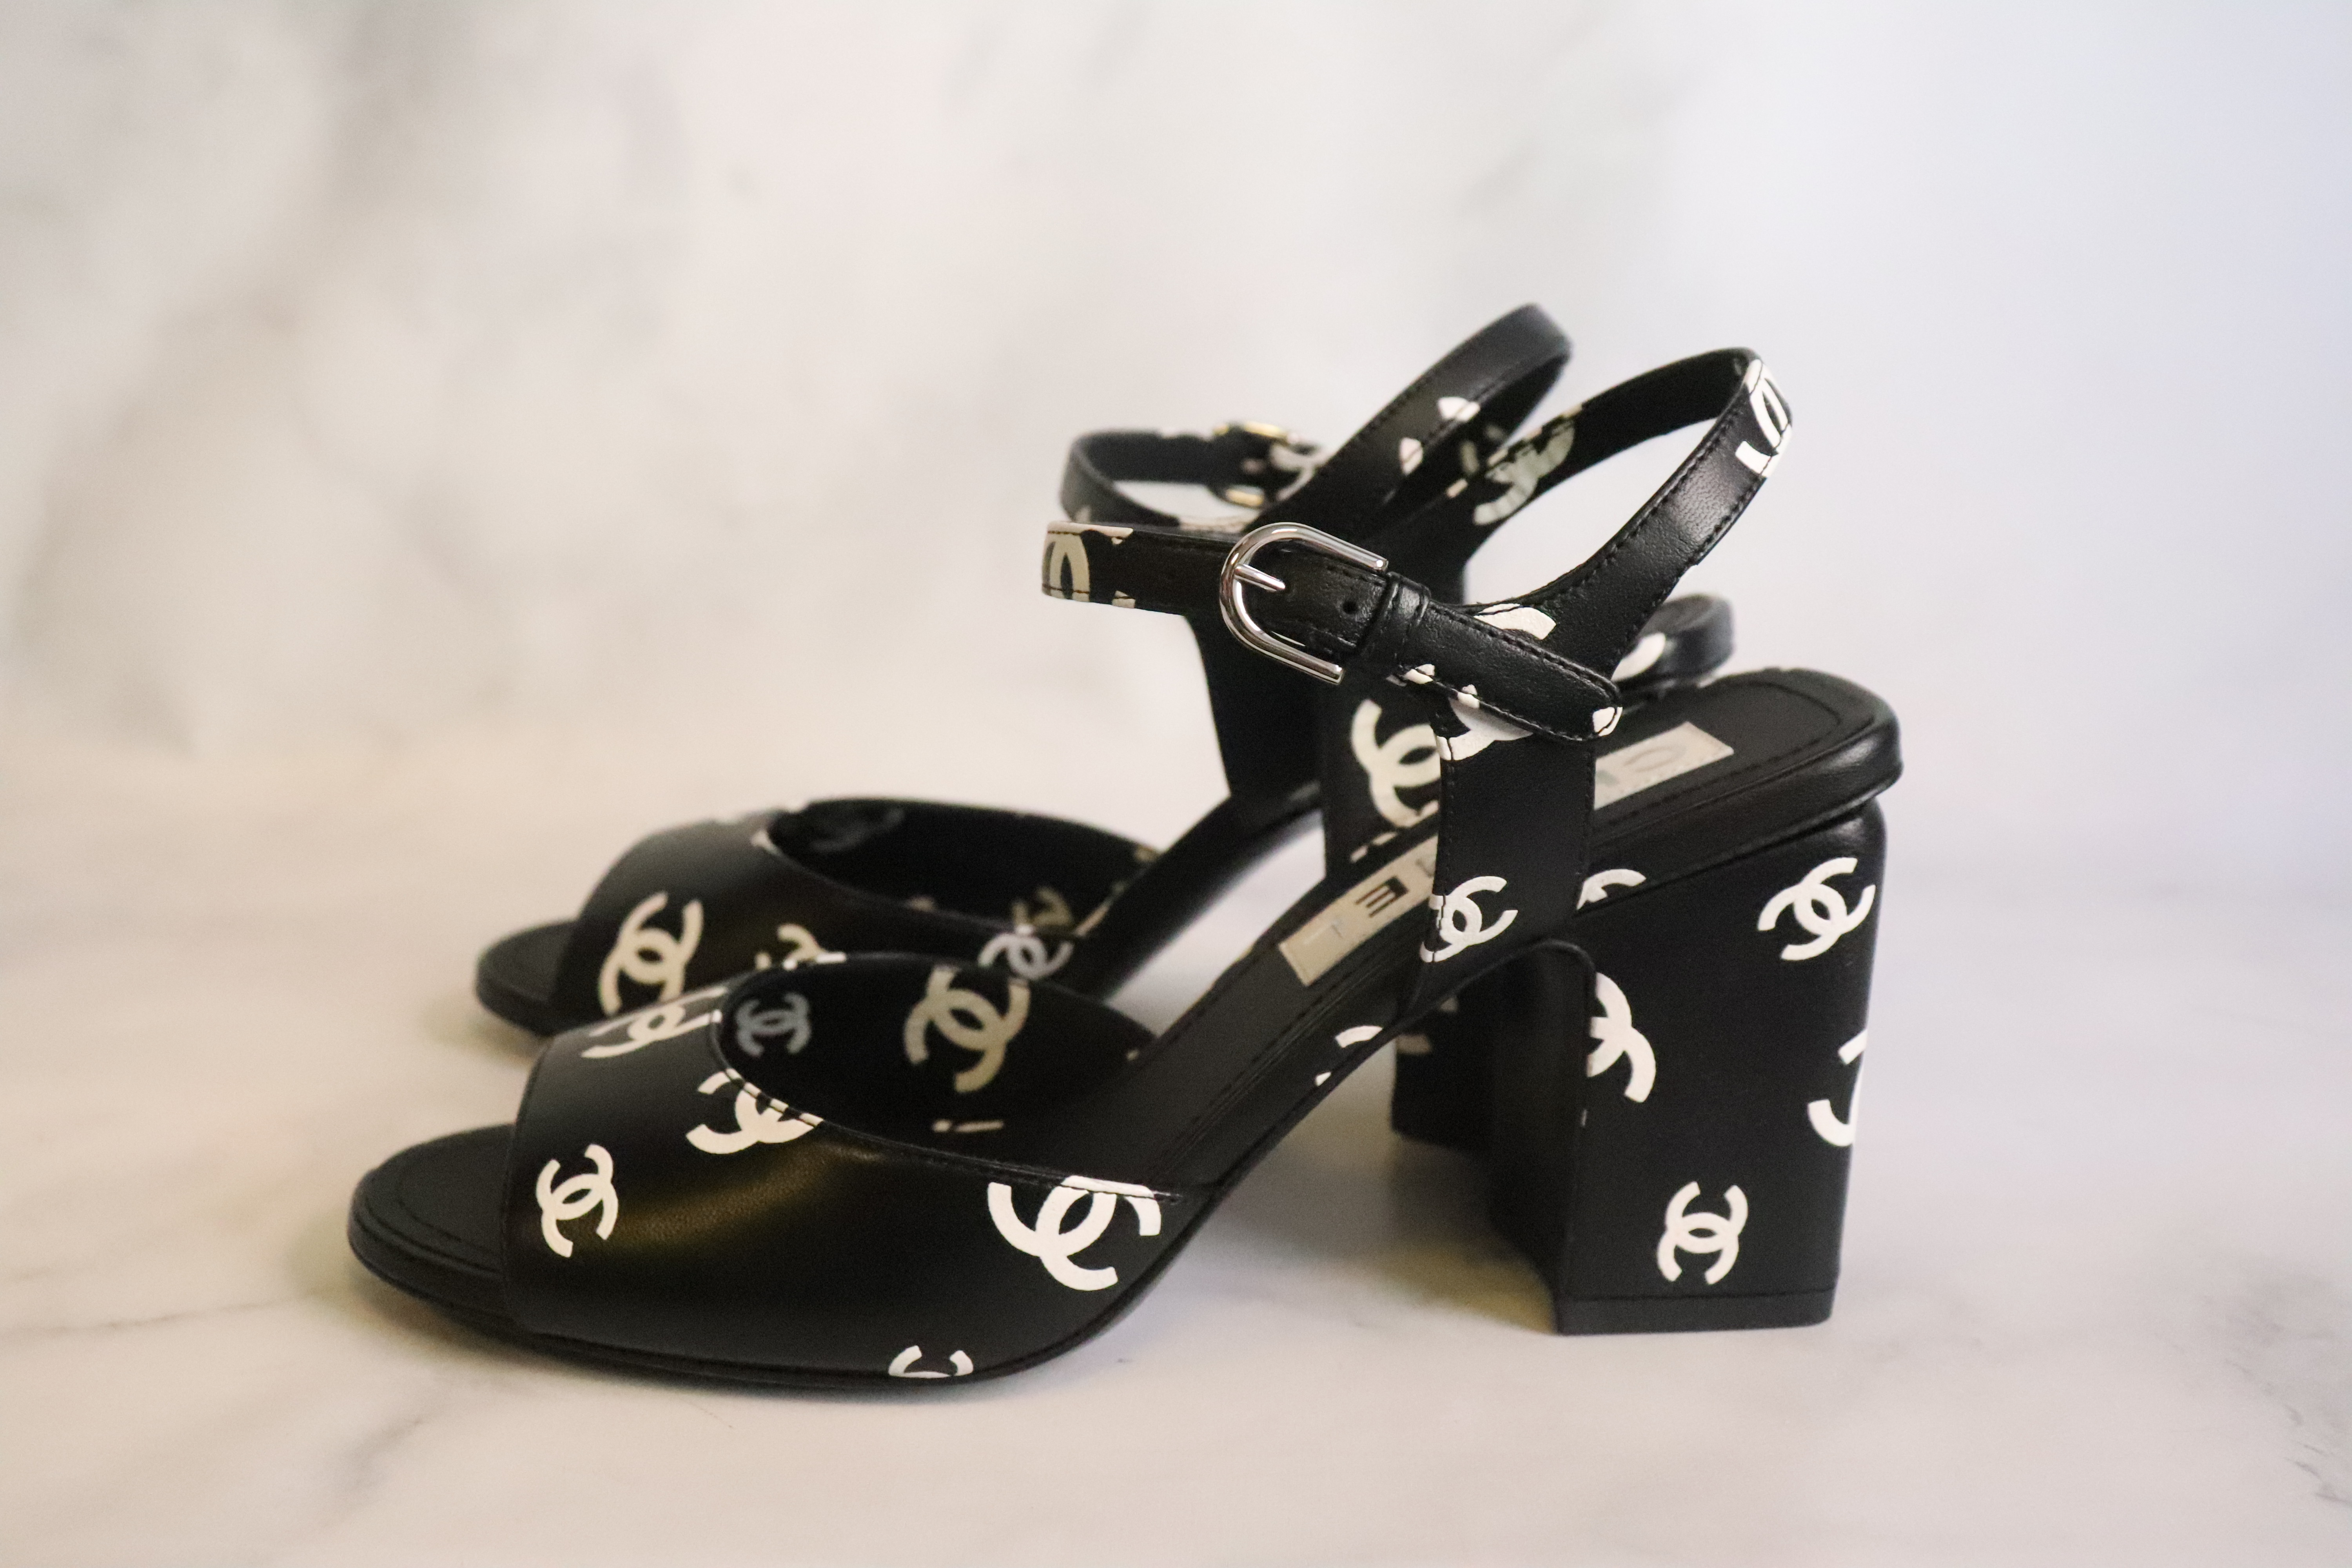 Chanel Shoes, Black with White CCs, Heels, Size 37, New in Box WA001